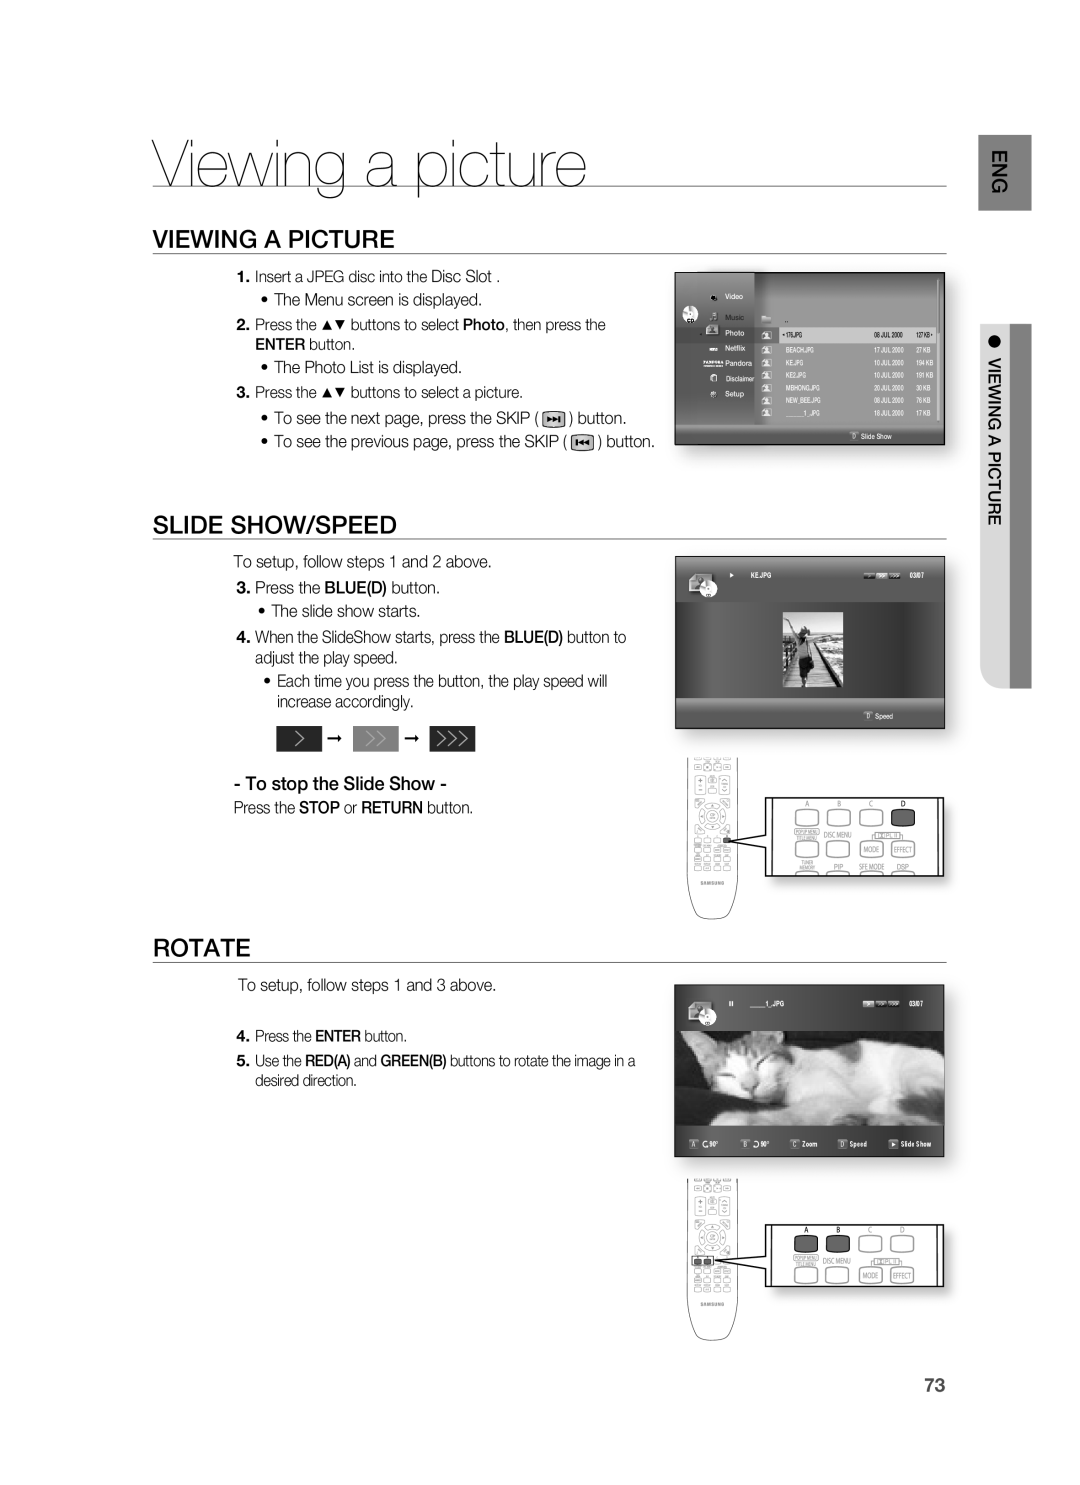 Samsung HT-BD1200, AH68-02178Z user manual Viewing a picture, Viewing A Picture, Slide Show/Speed, Rotate 